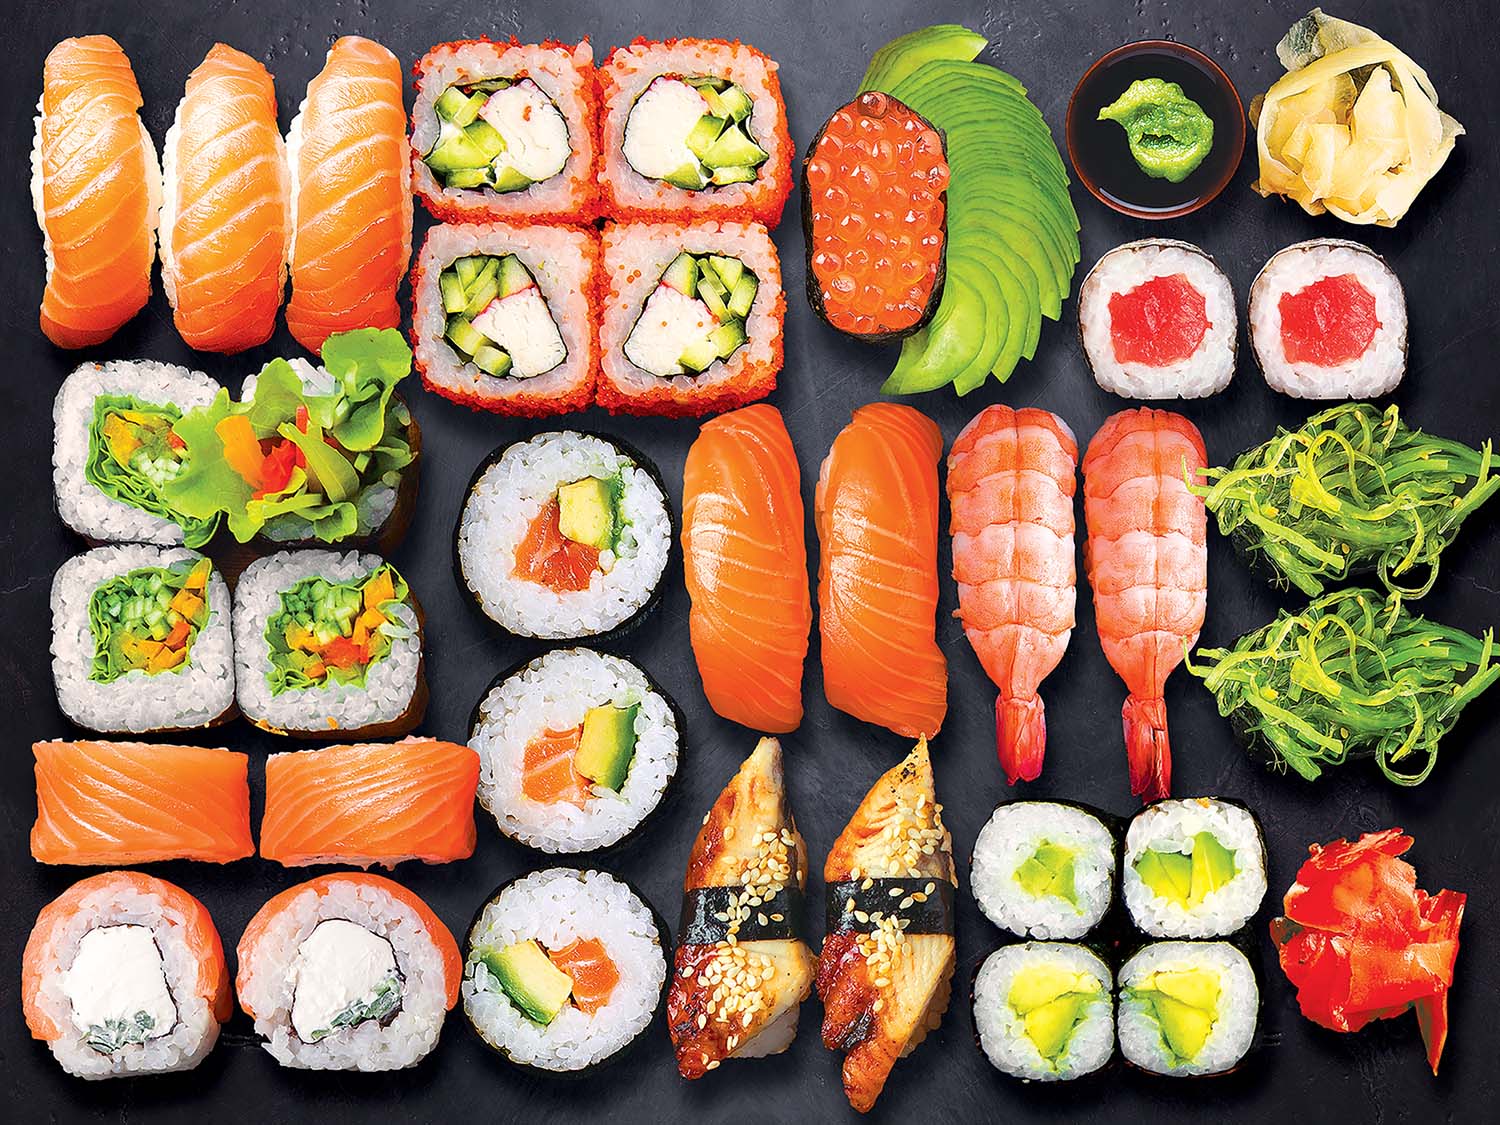 Yummy - Sushi Time Food and Drink Jigsaw Puzzle